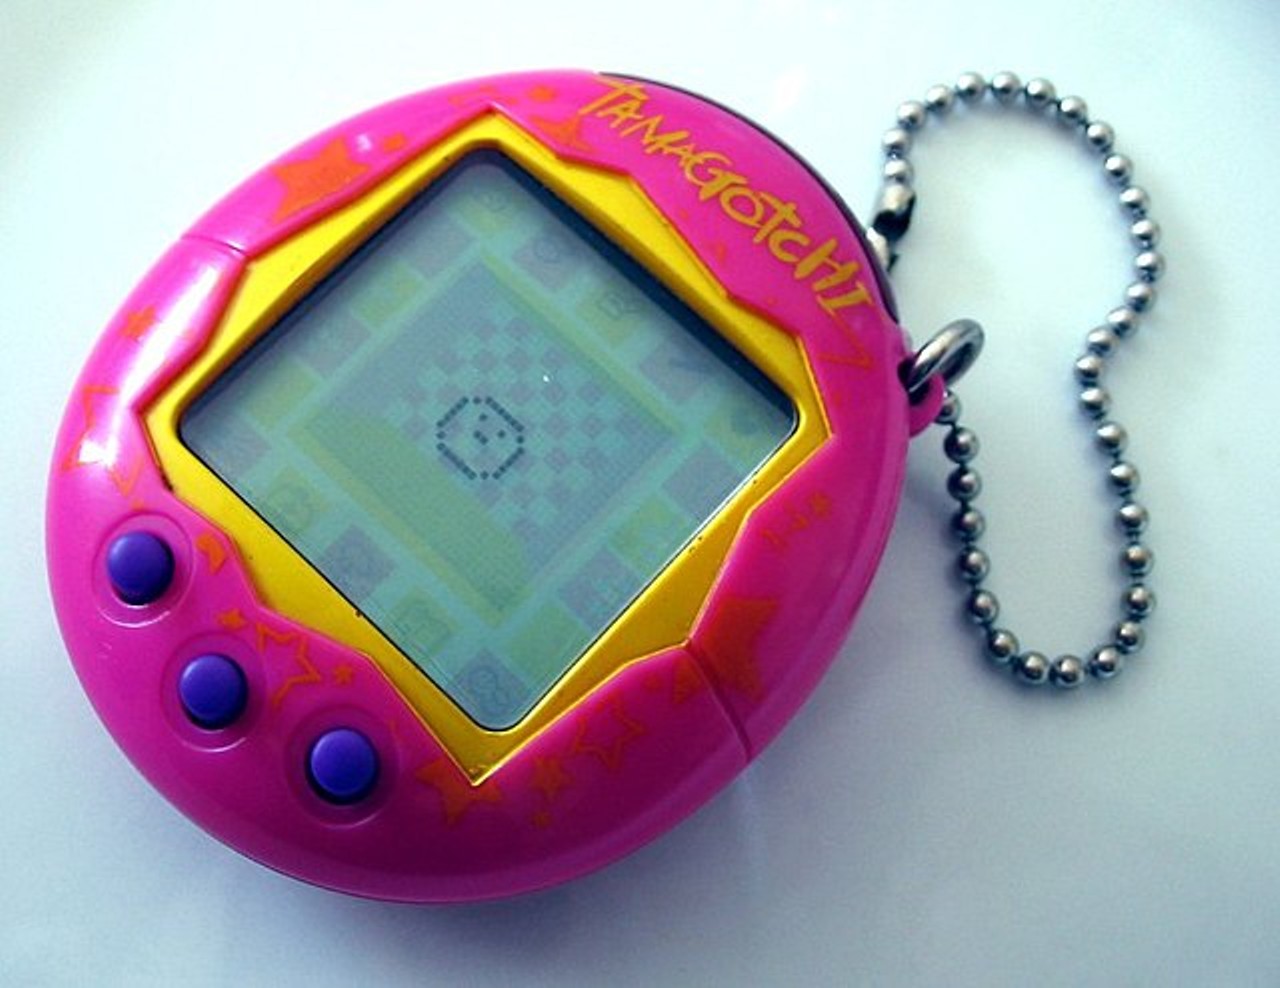 Tamagotchis were born (1997) — and many have been left to die